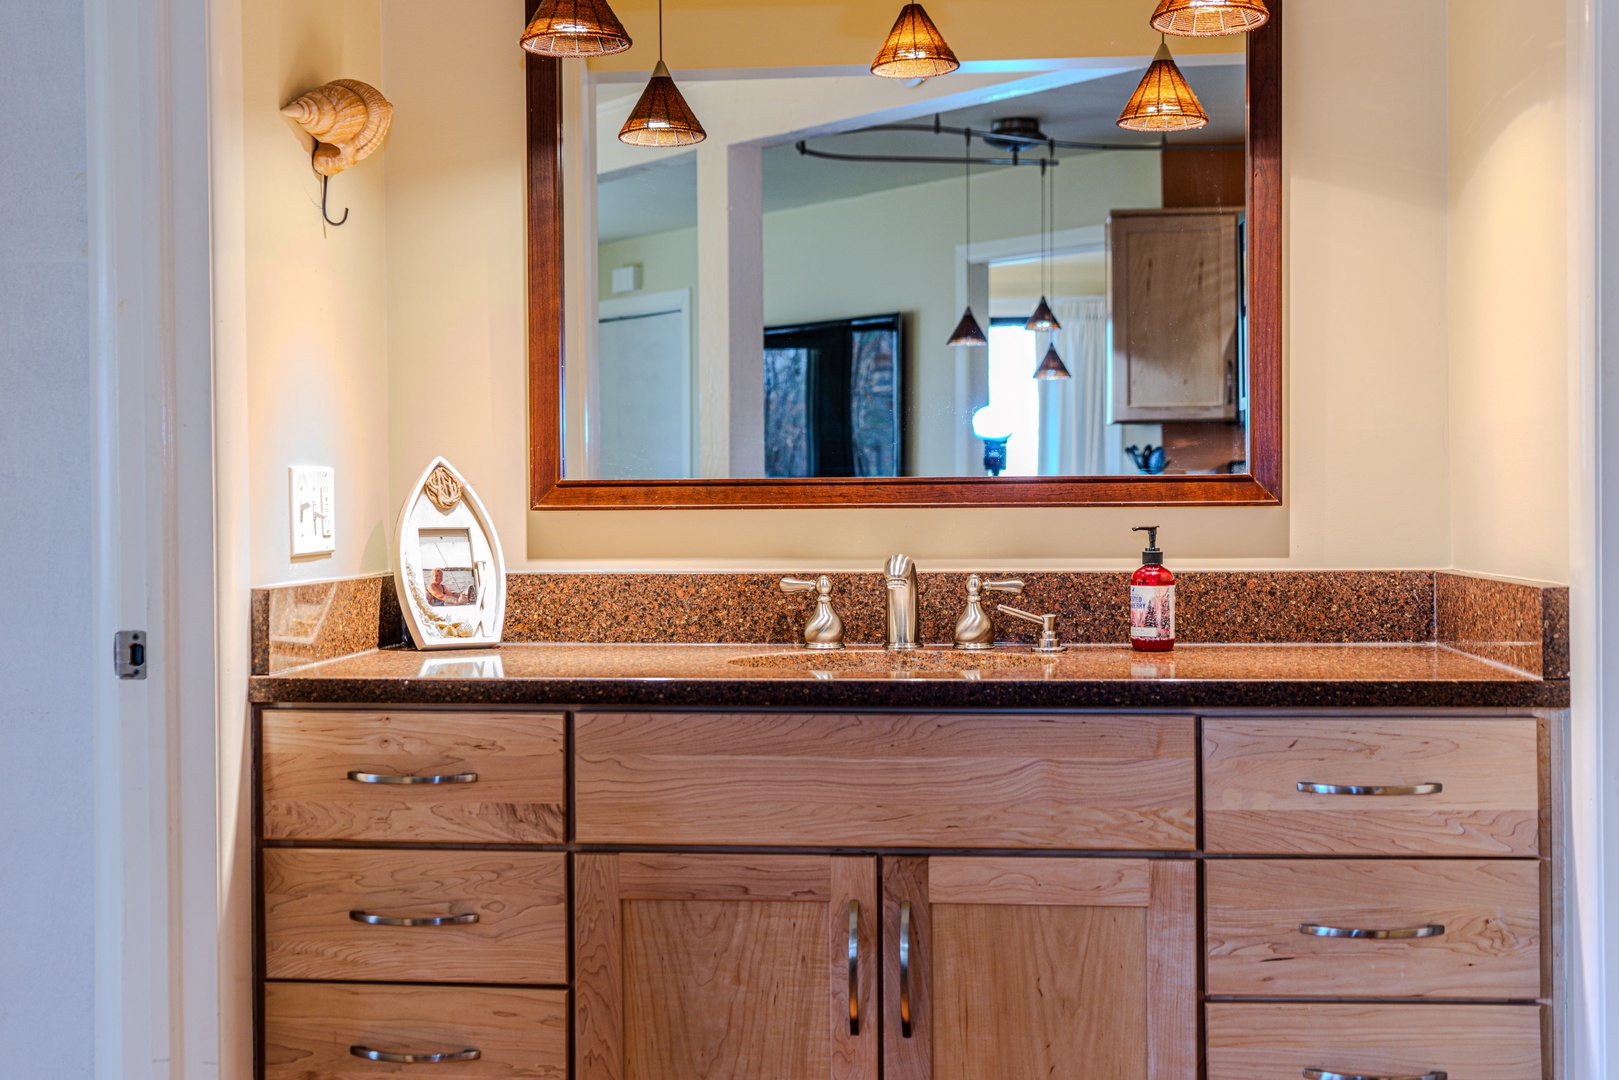 The full bathroom offers a single vanity with storage & glass shower